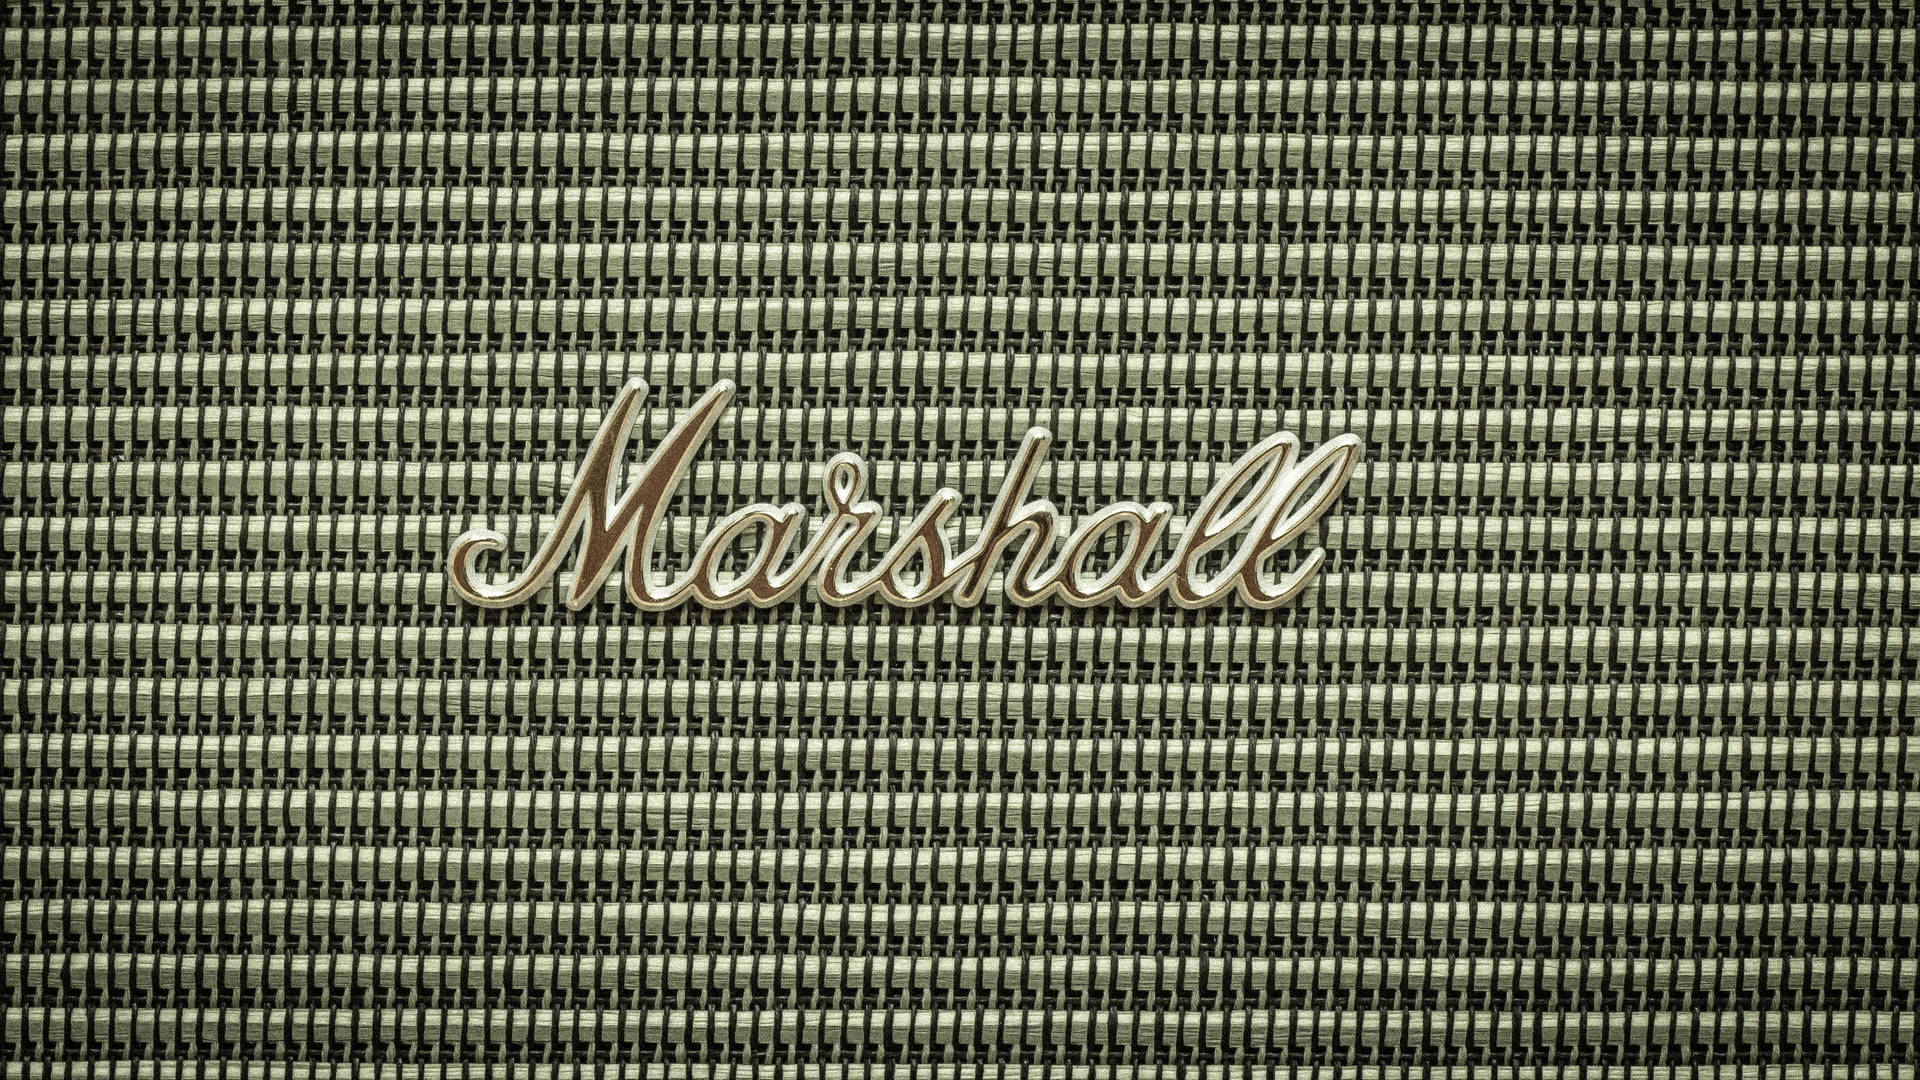 Top 154+ marshall wallpaper images latest